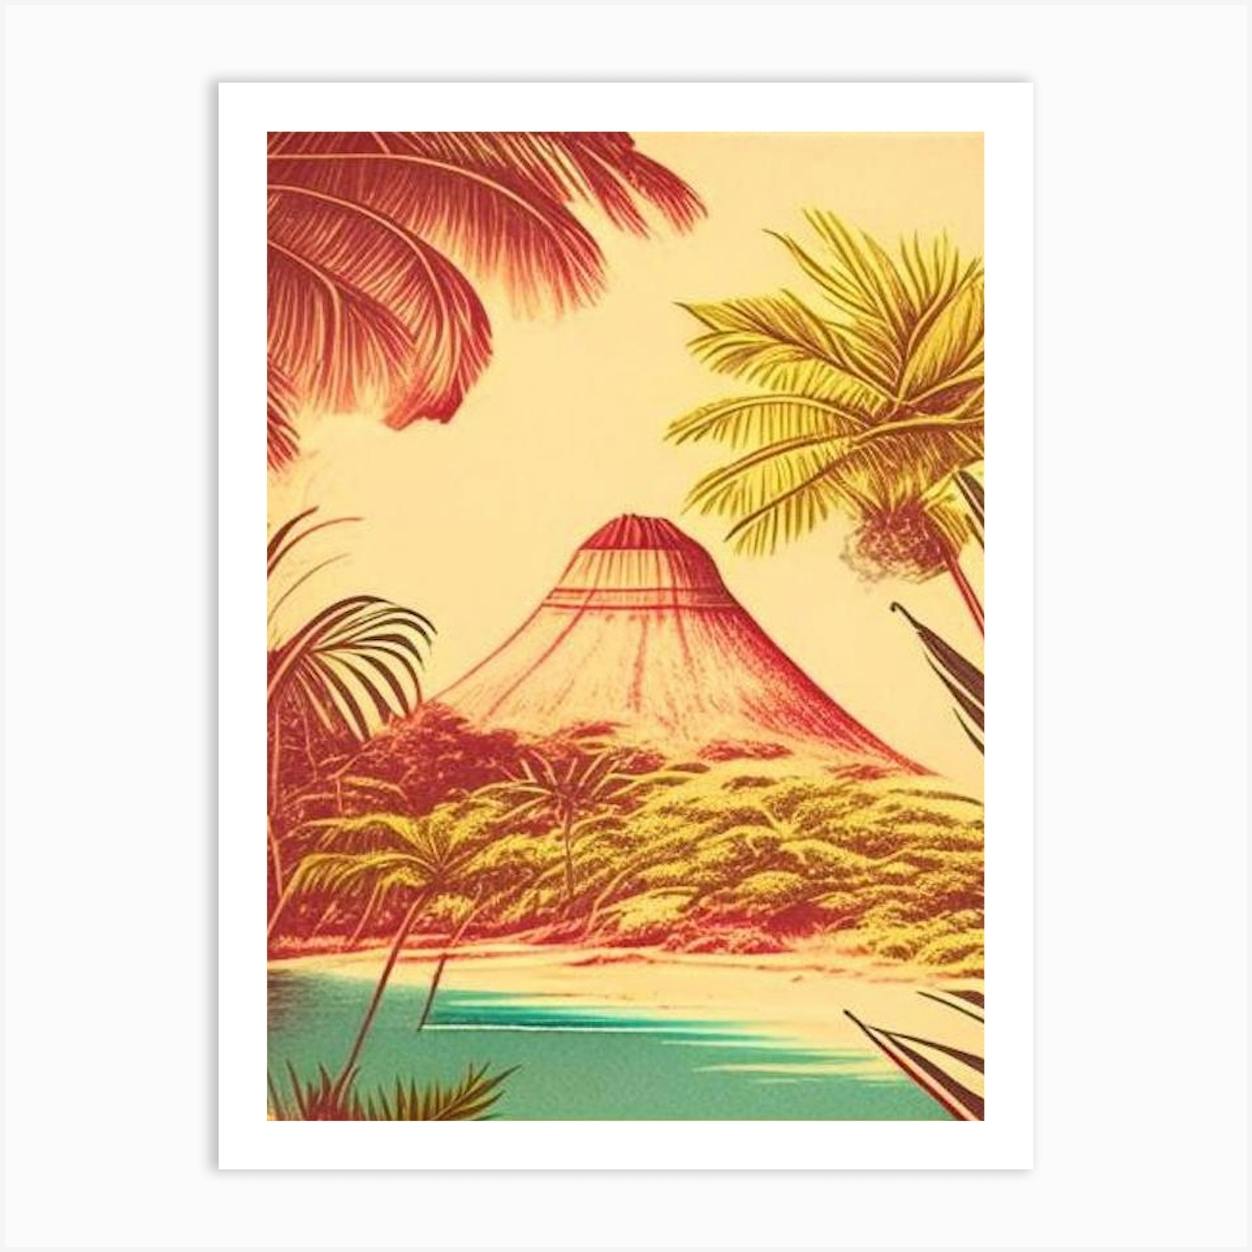 Big Box Art Palm Reflections in Mauritius Sketch Canvas Wall Art Picture  Ready to Hang 76 x 50 cm (30 x 20 Inches) White Green Turquoise Green Olive  Green : Amazon.de: Home & Kitchen